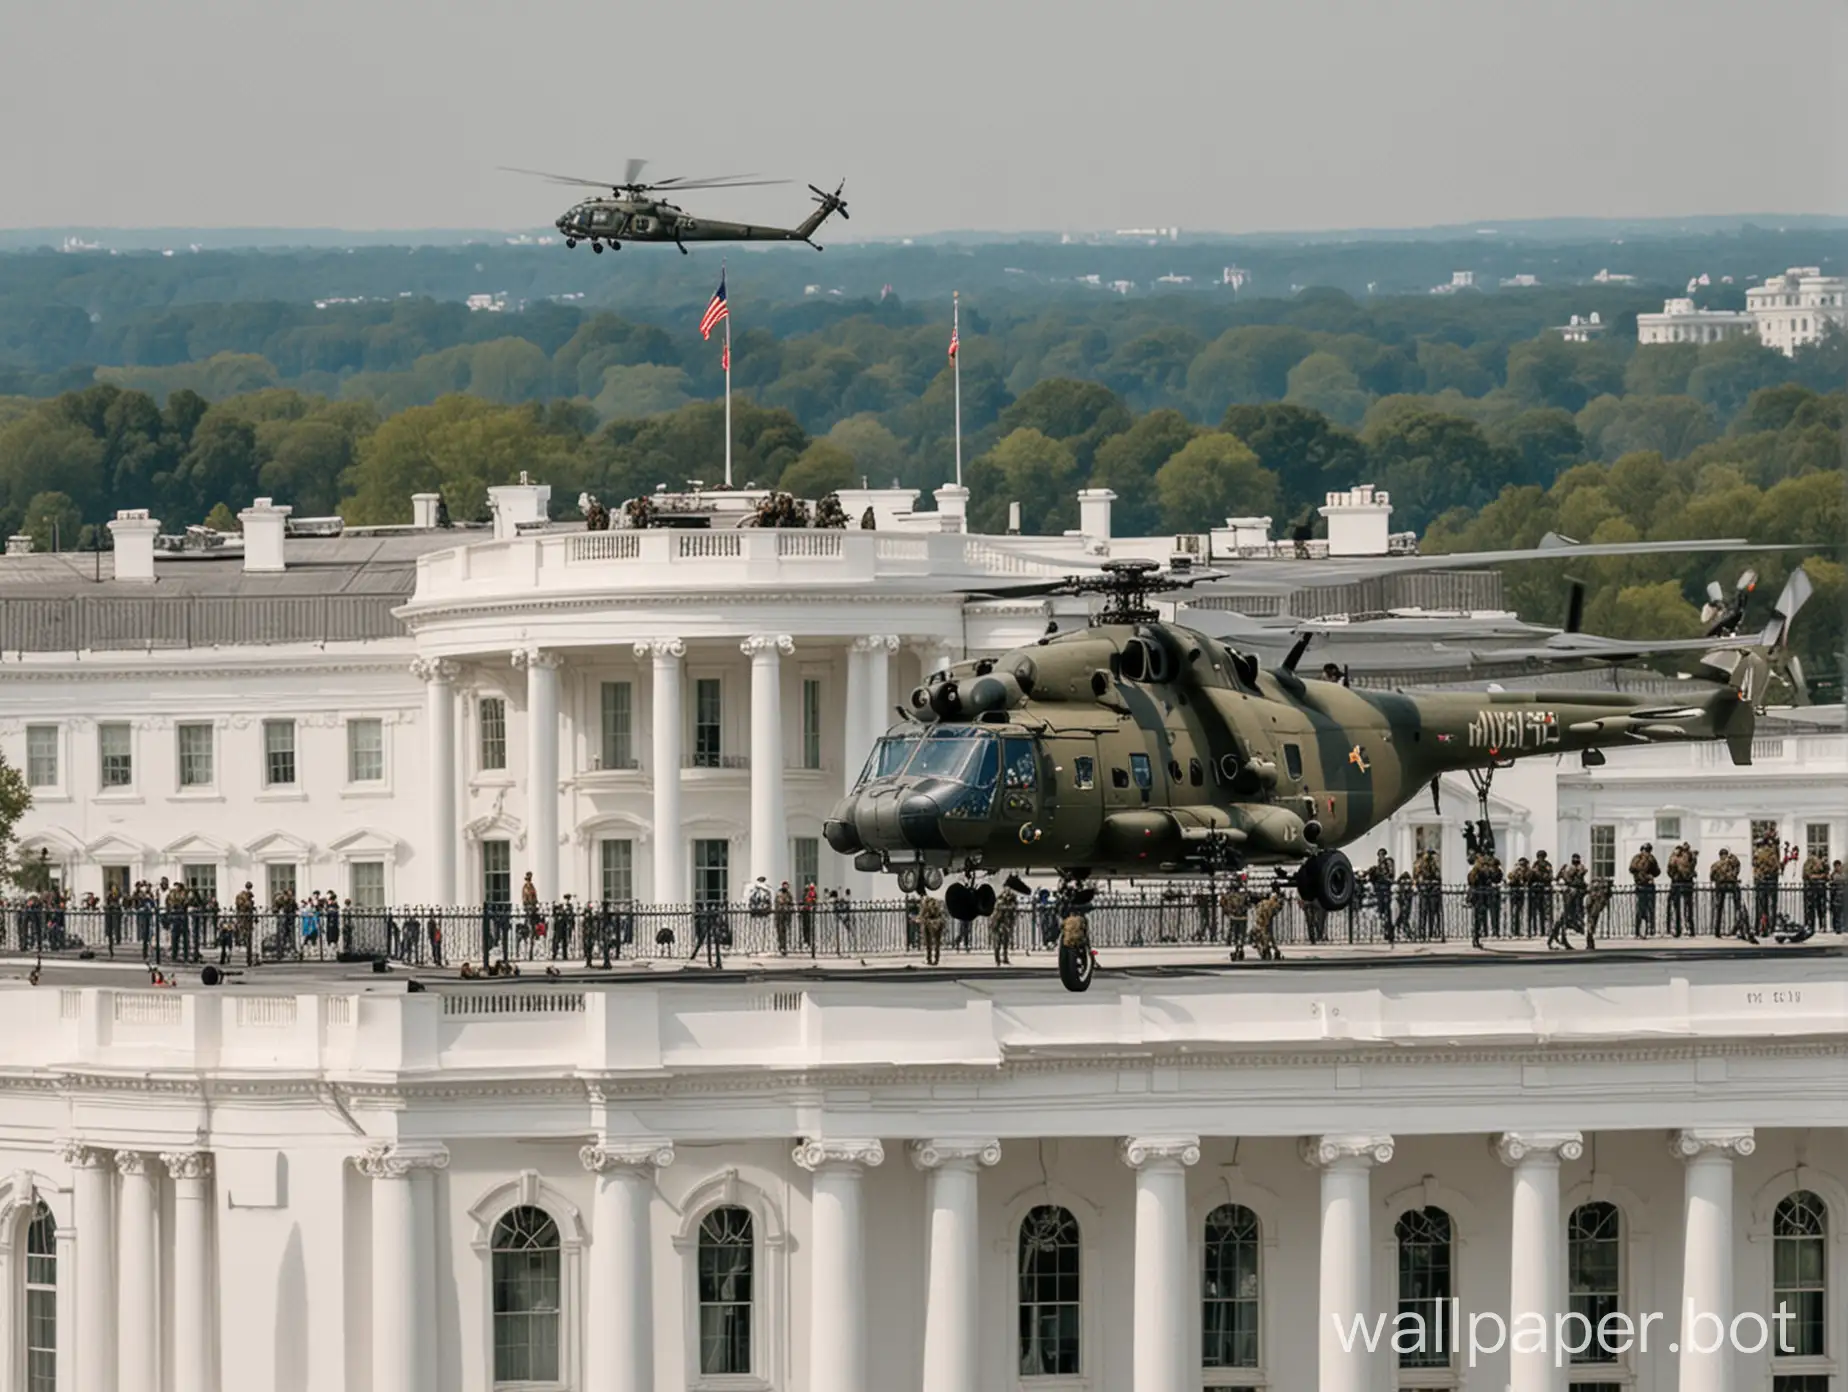 hellicopter mi-8 deploying soldiers on the roof of the White House in Washington. clear day